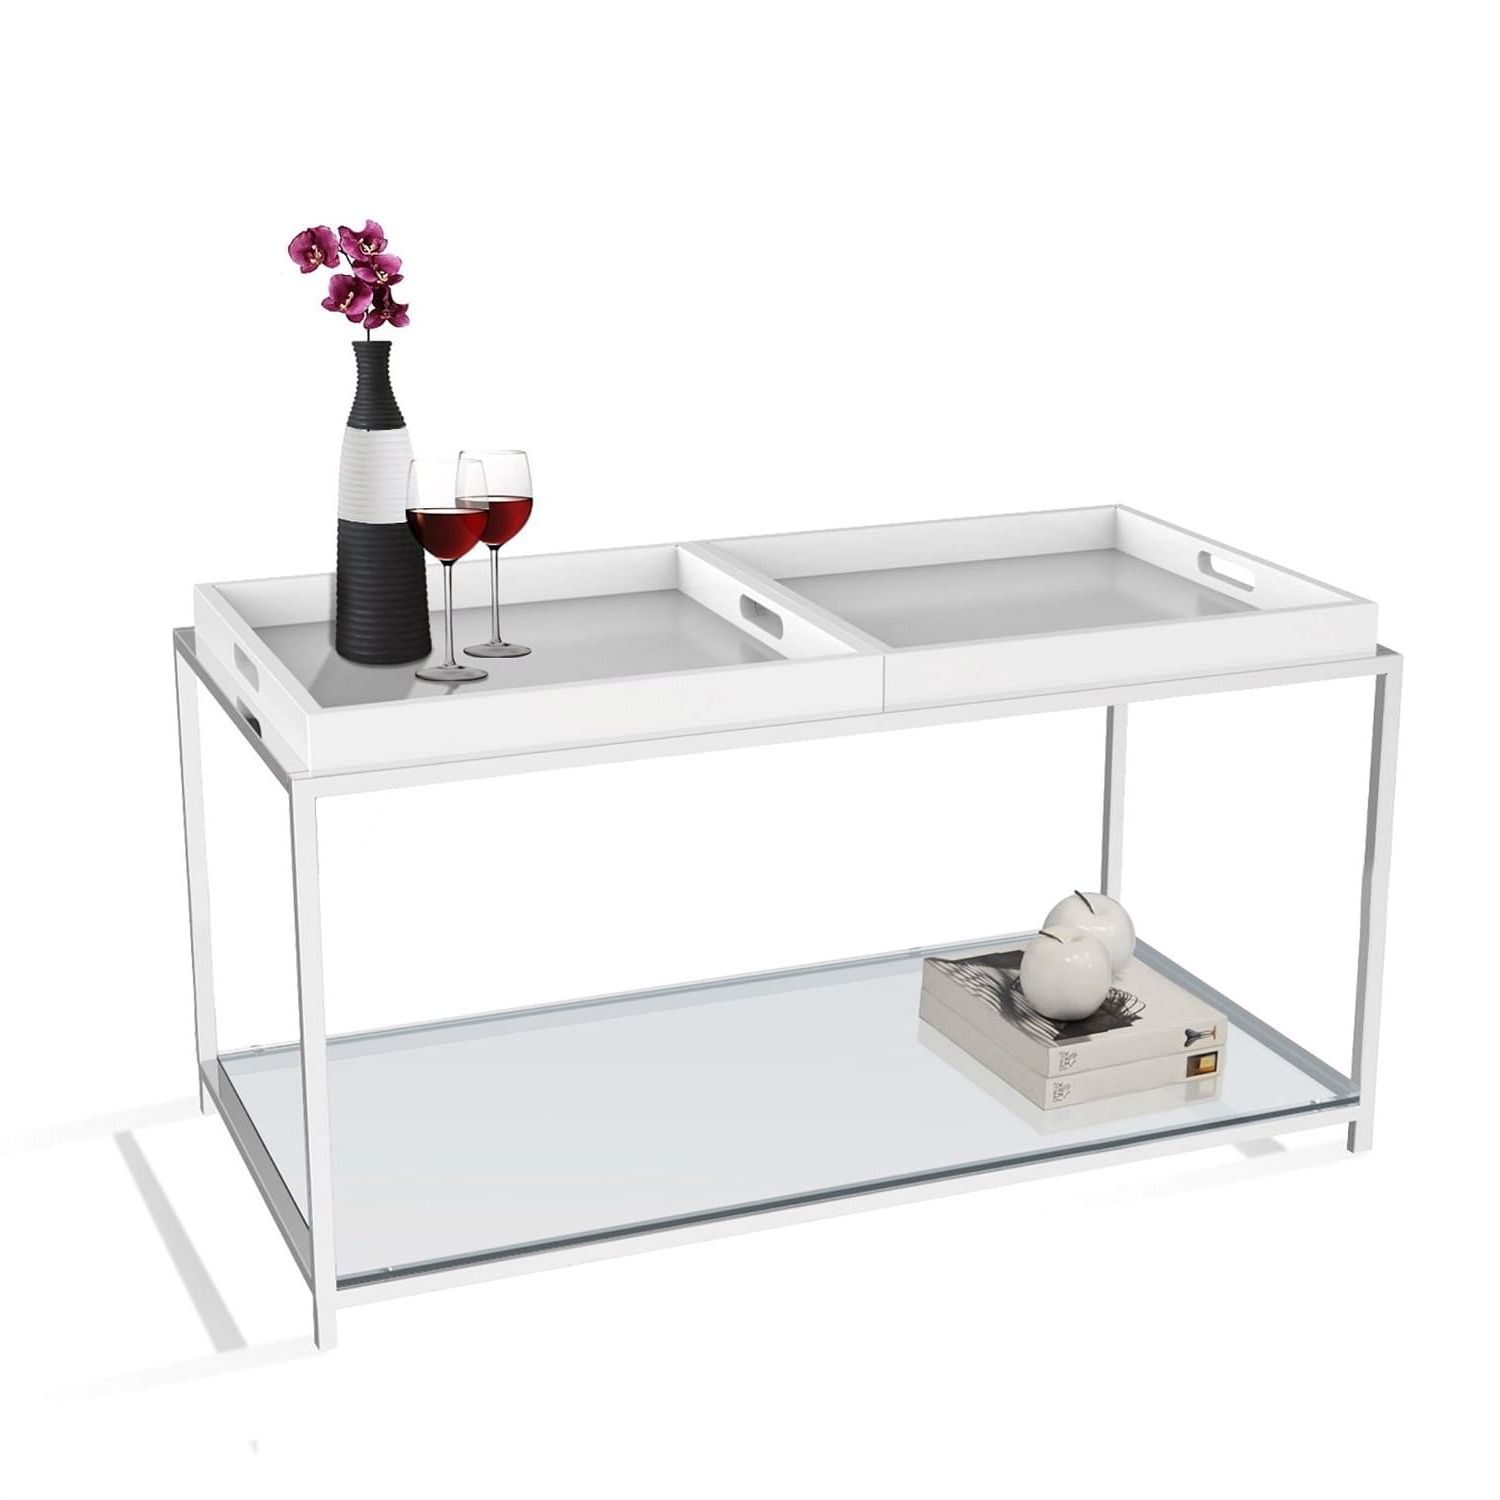 Detachable Tray Coffee Tables Within Preferred Modern Chrome Metal Coffee Table 2 White Removable Trays (View 15 of 15)